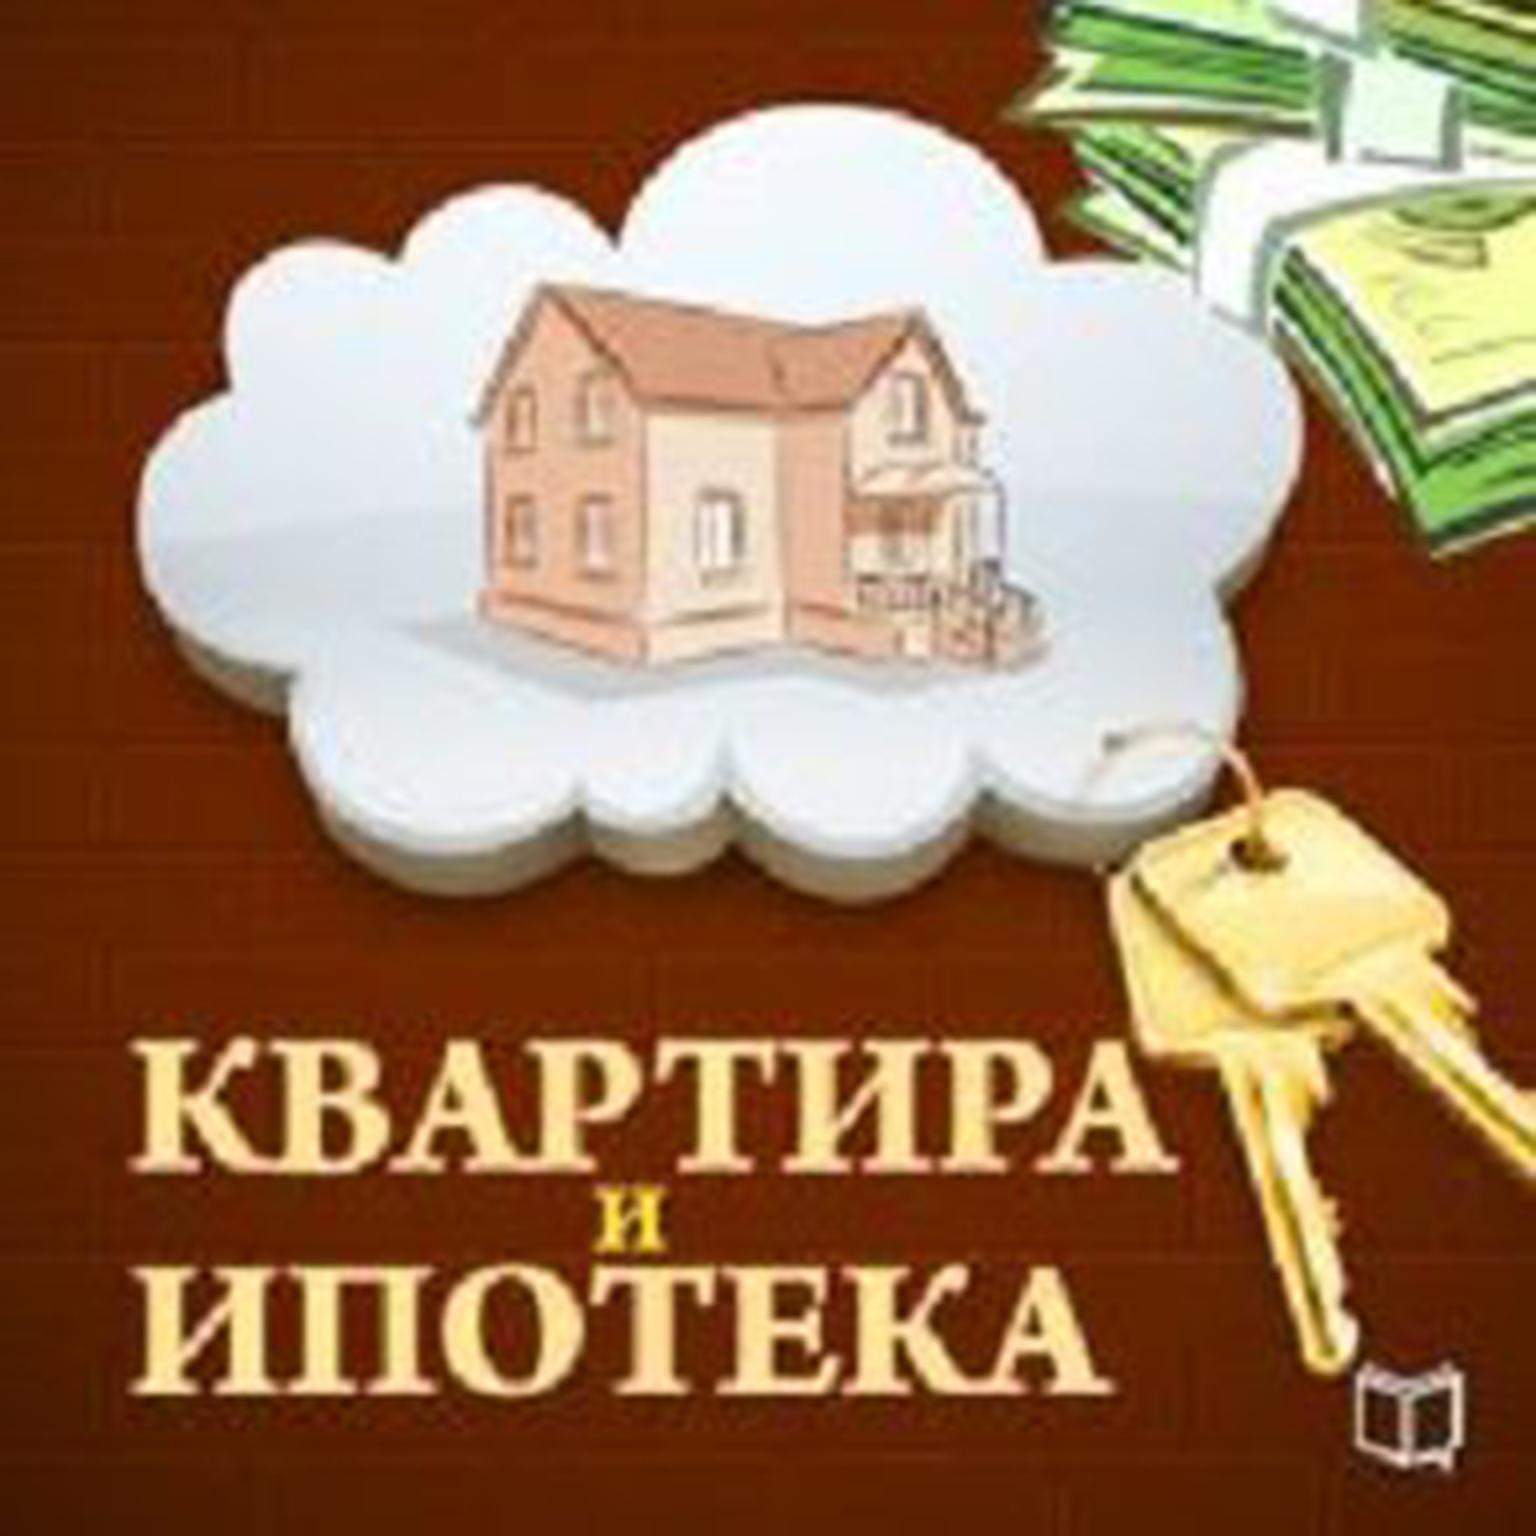 Apartments and Mortgages: The 50 Tricks of Purchase [Russian Edition] Audiobook, by Roman Zuev